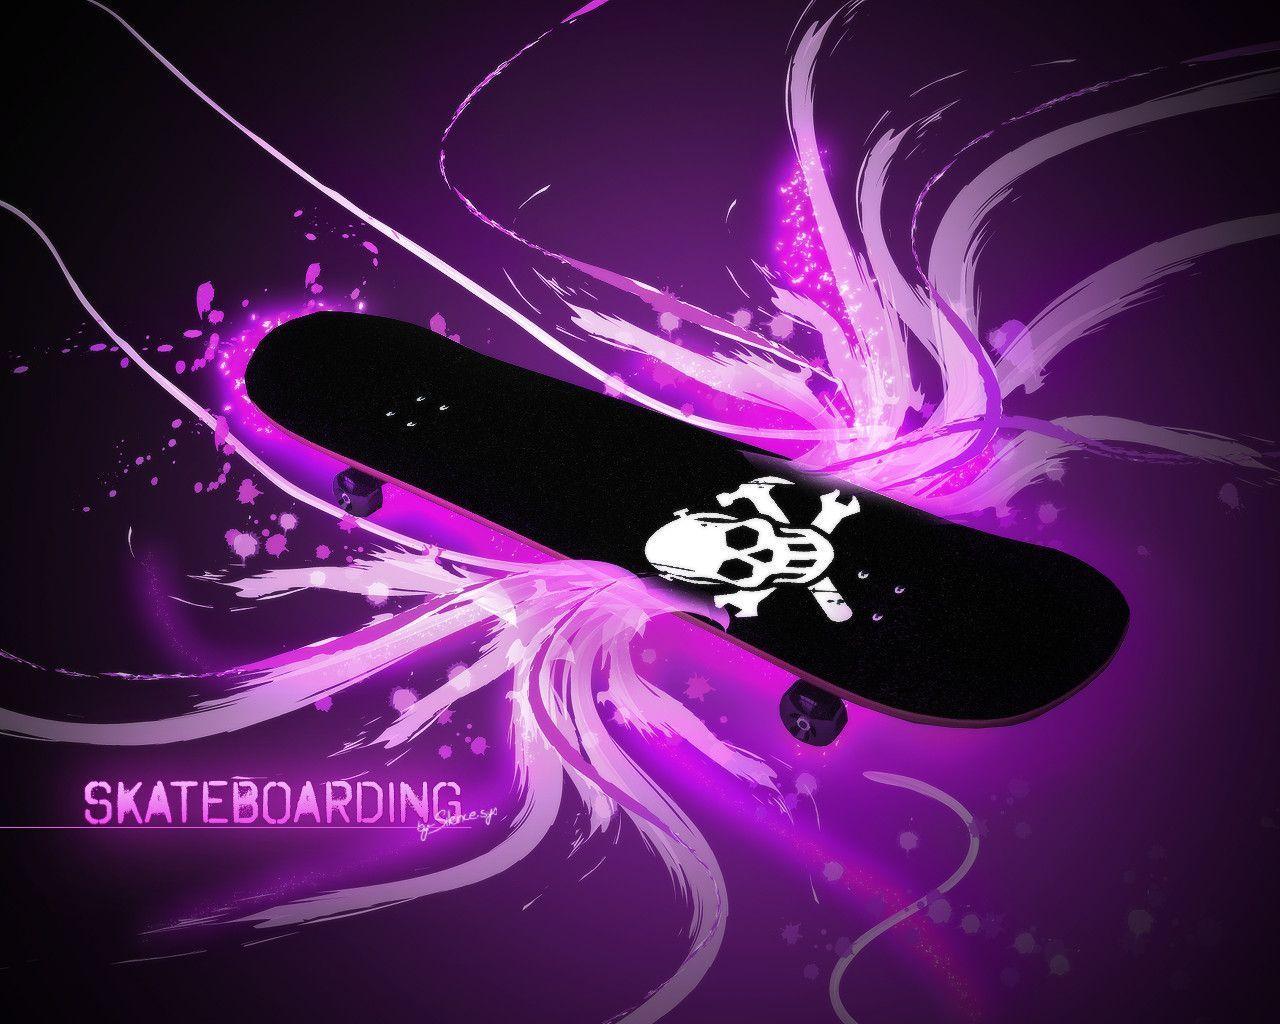 Crazy Cool Wallpaper for Skateboarders